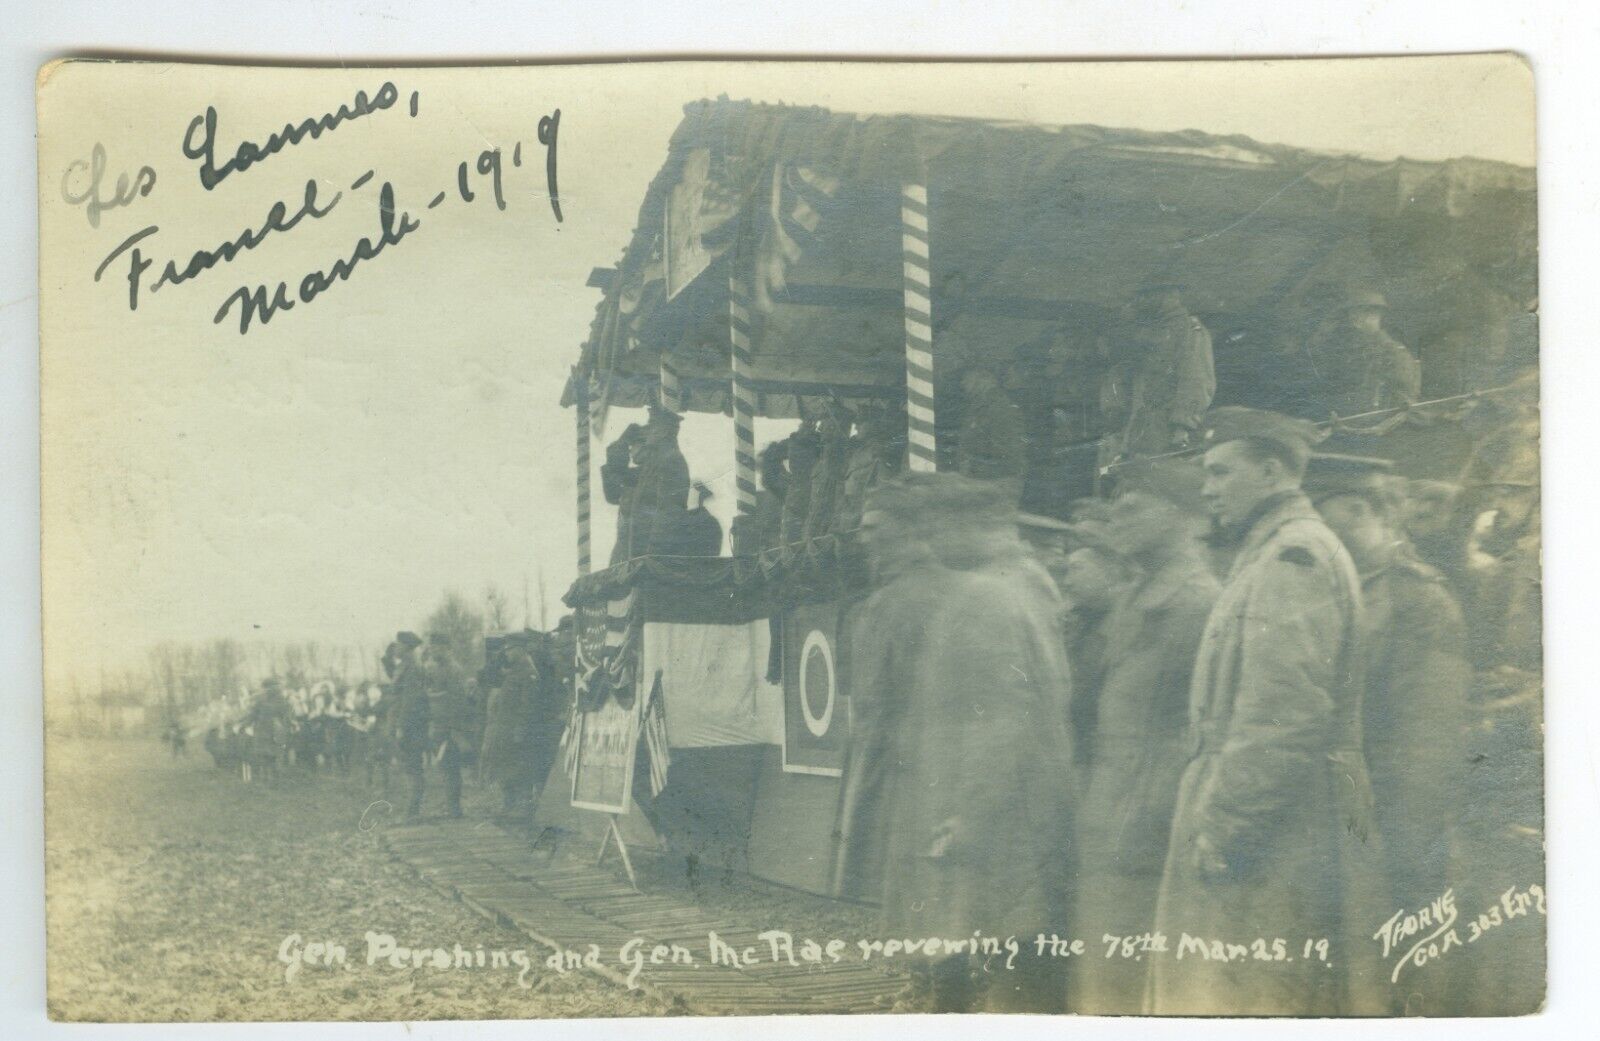 Orig March 25 1919, WWI Gen Pershing & McRae View US 78th Div Les Laumes, France